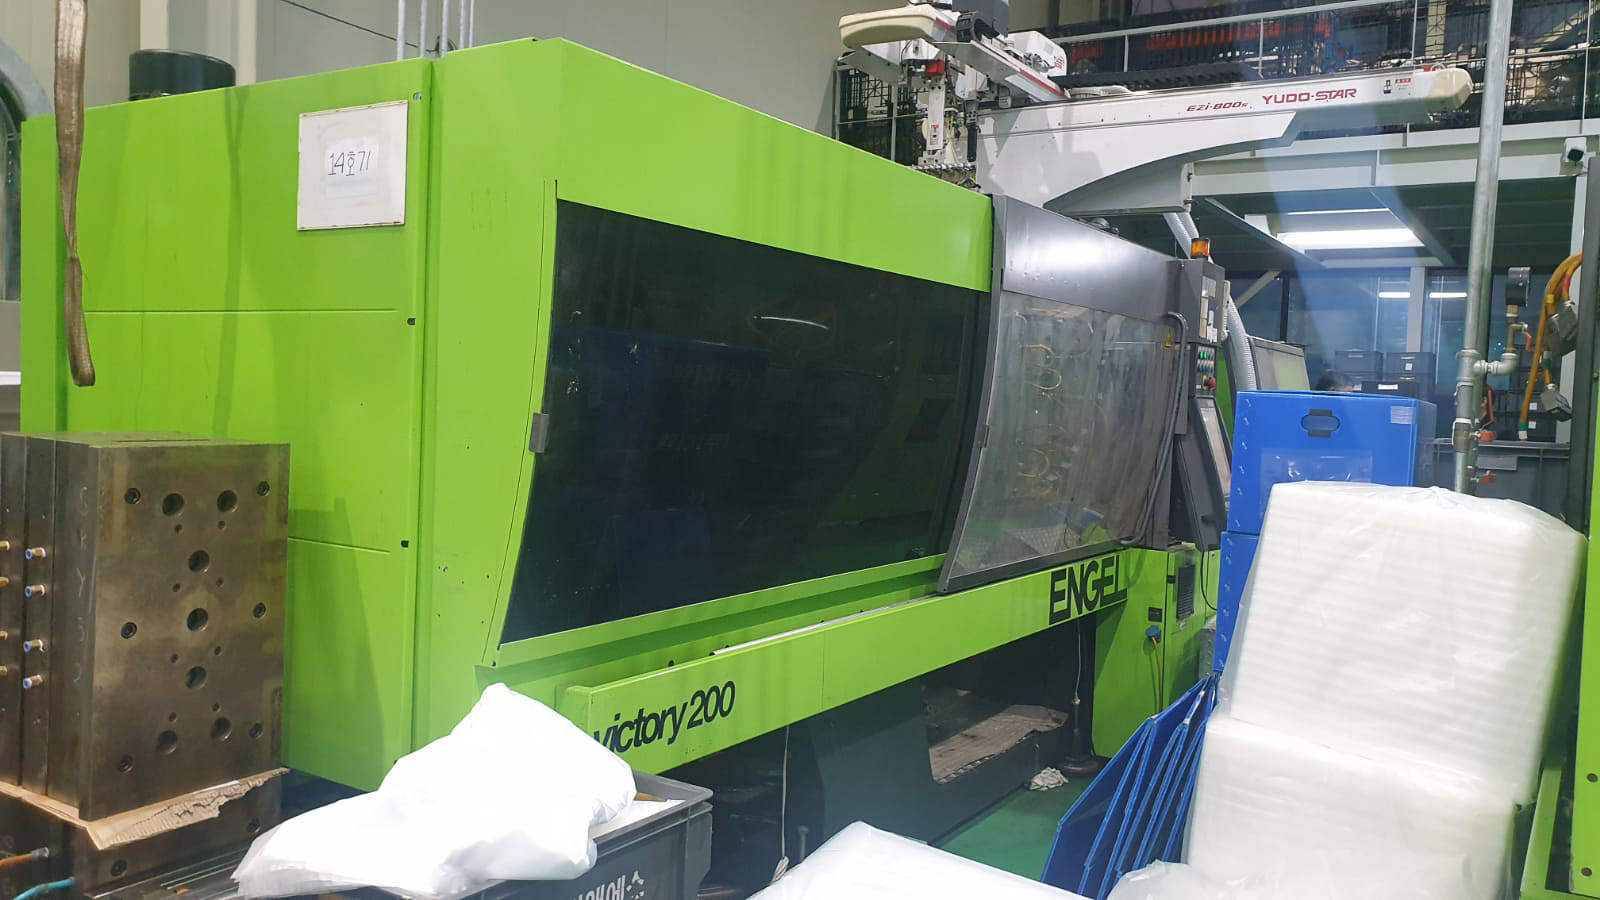 ENGEL VICTORY 650H / 200W / 200 COMBI 200t injection molding machine (2009) id11016